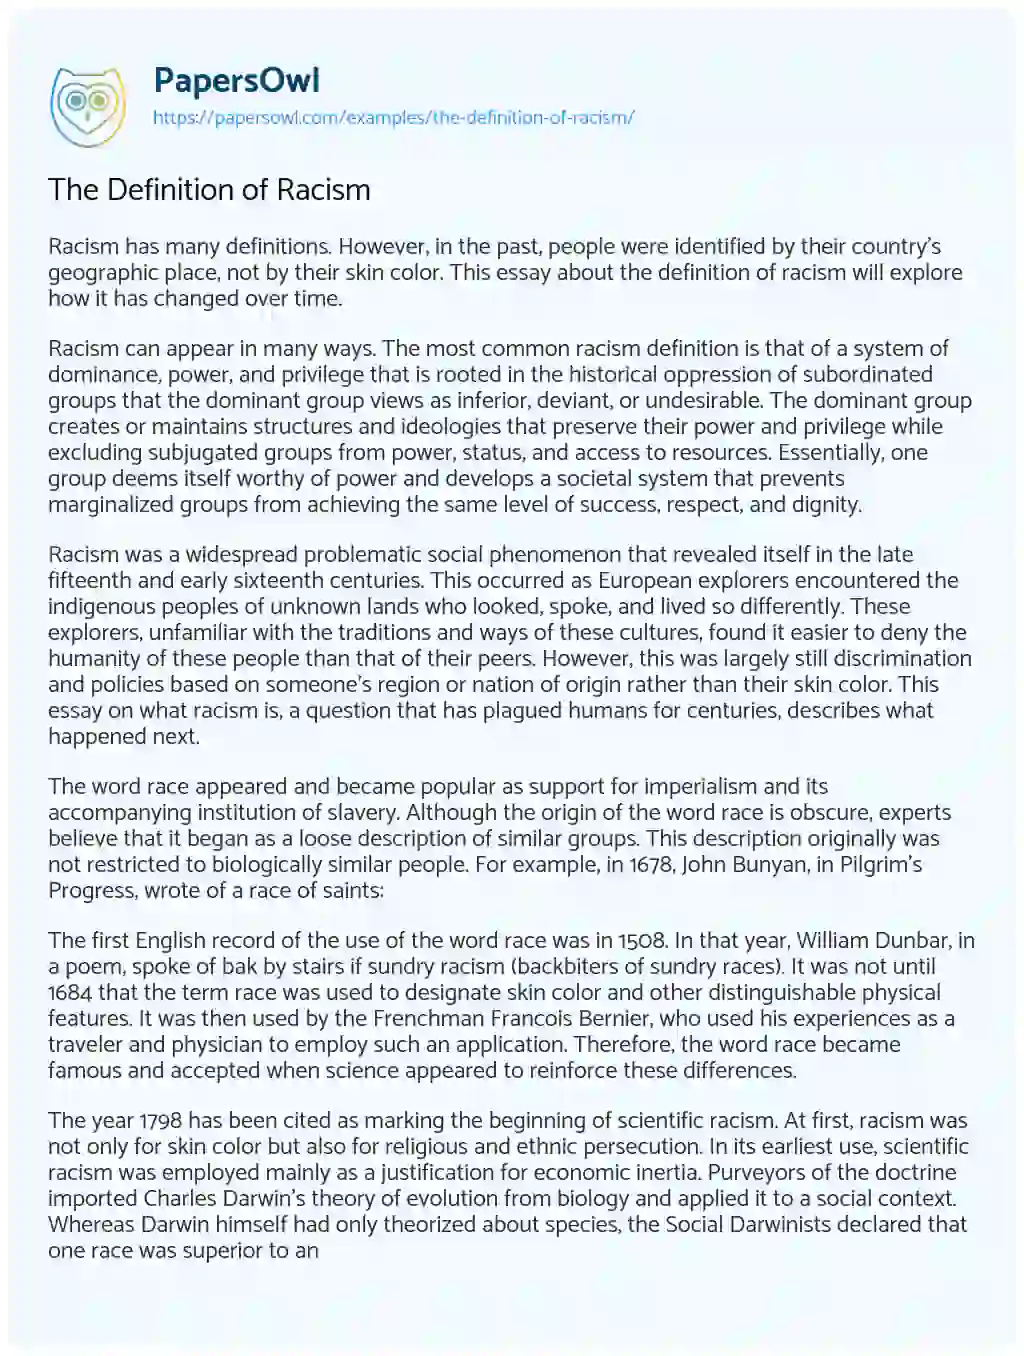 The Definition of Racism essay